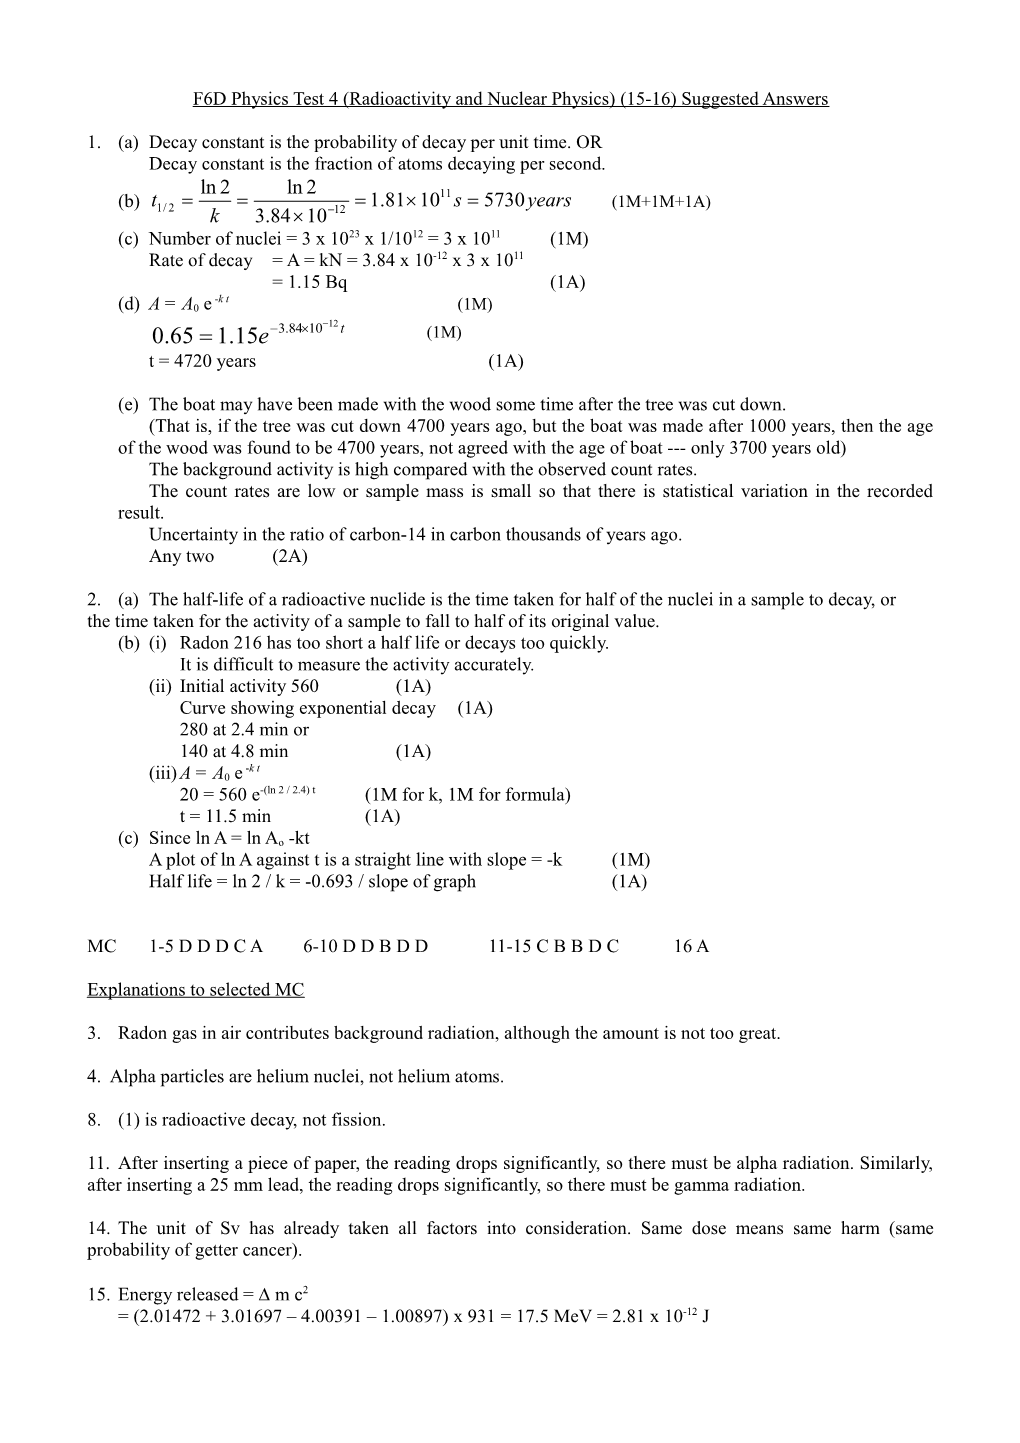 F6D Physics Test 4 (Radioactivity and Nuclear Physics) (15-16) Suggested Answers